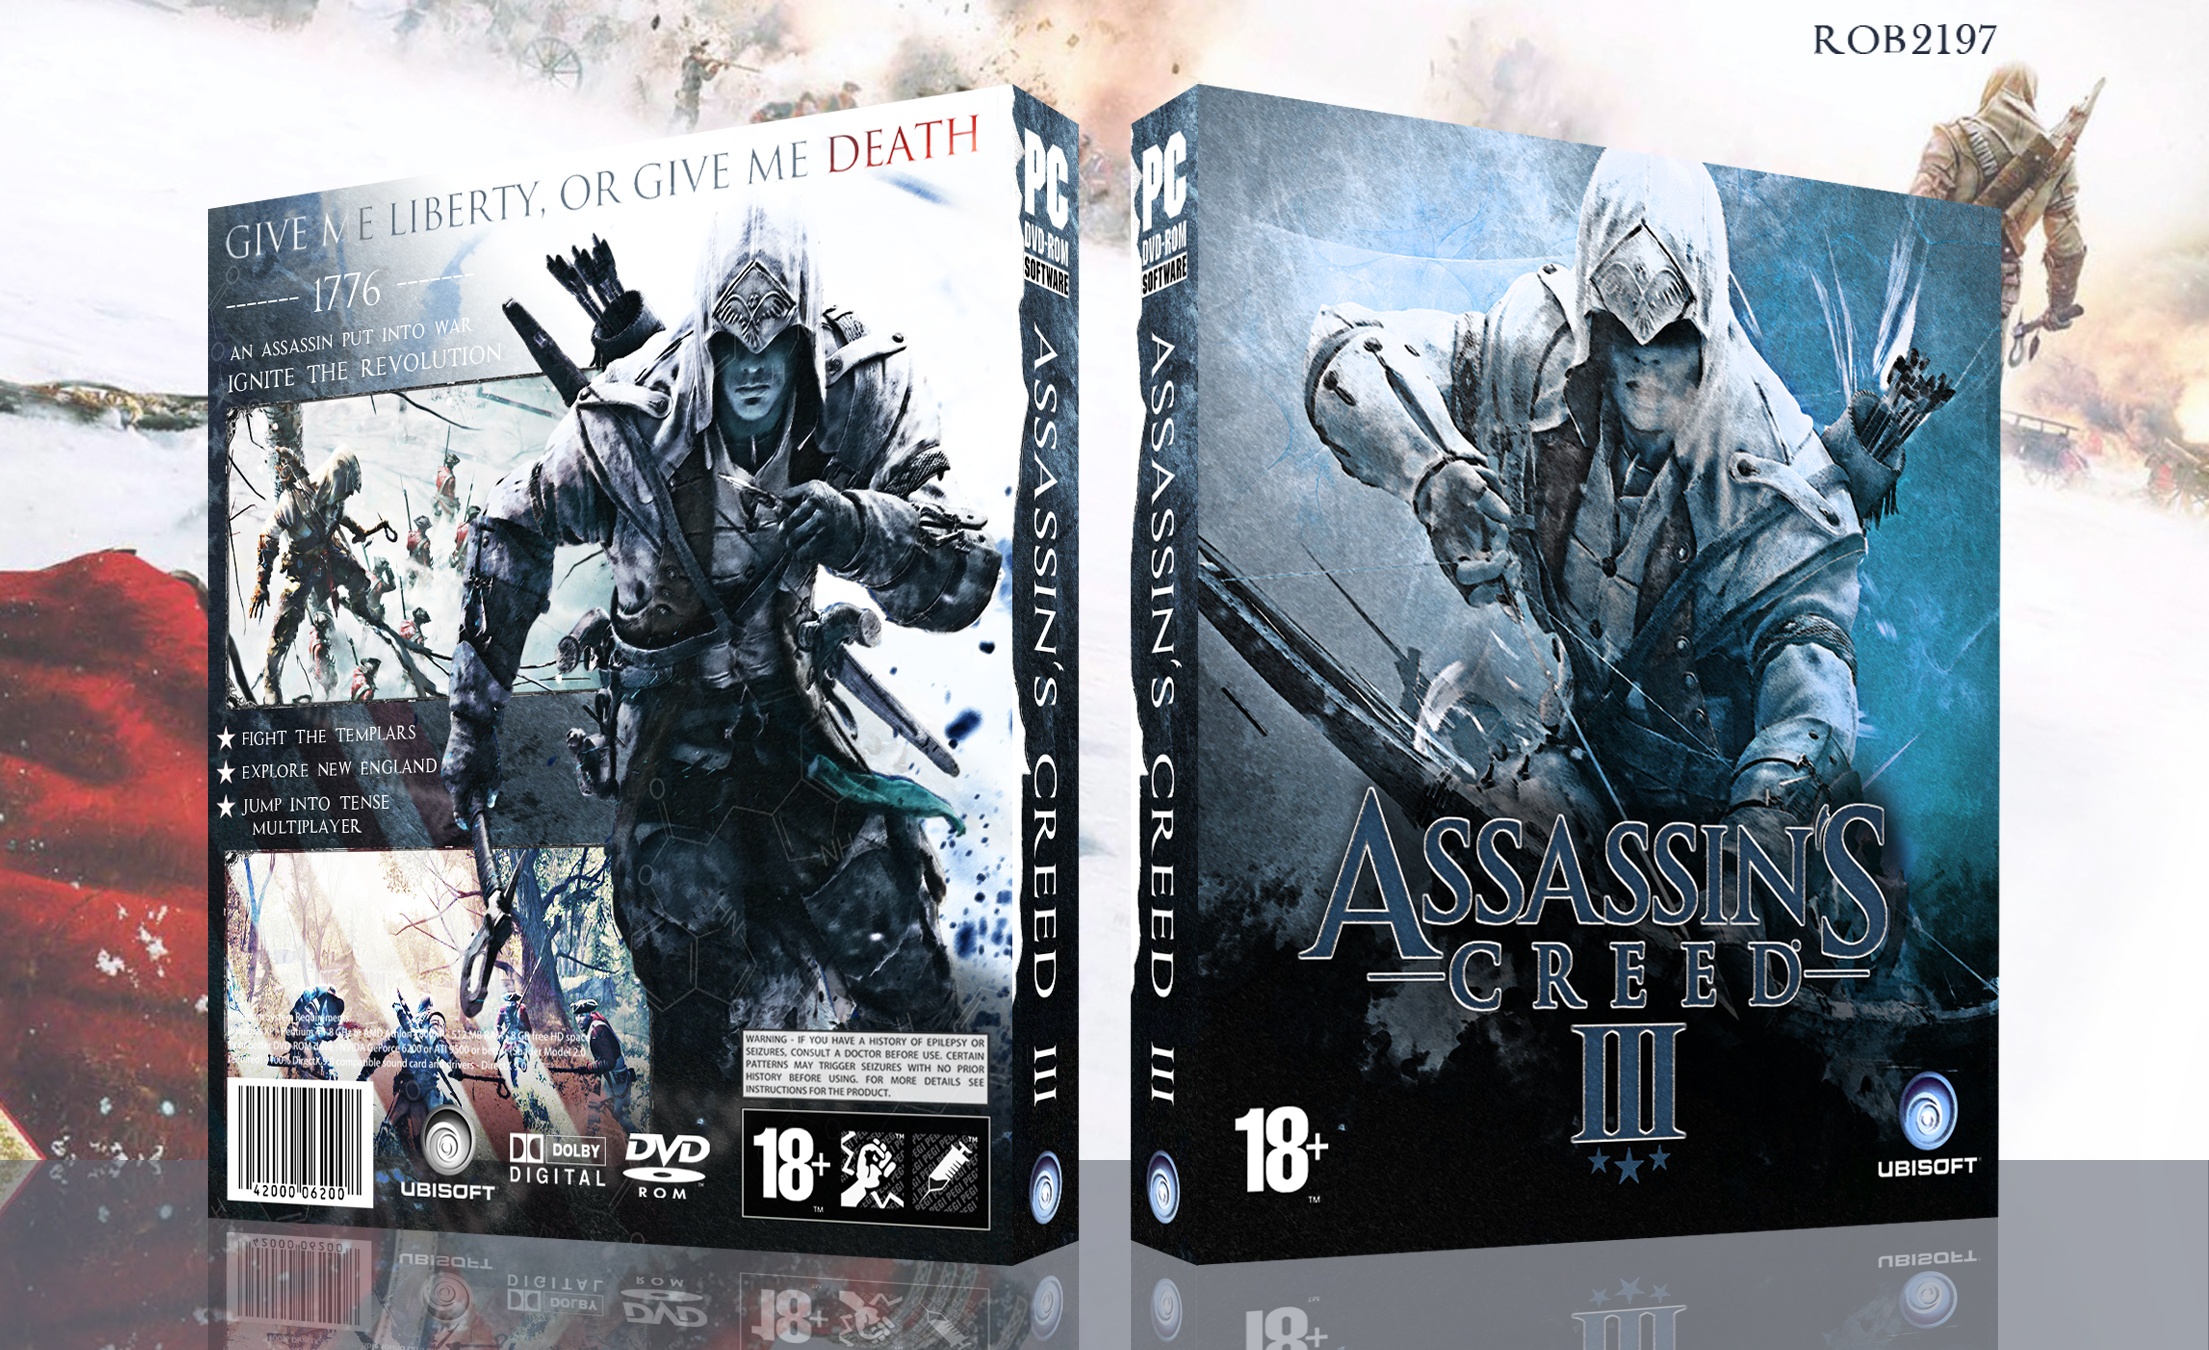 Assassin's Creed III box cover